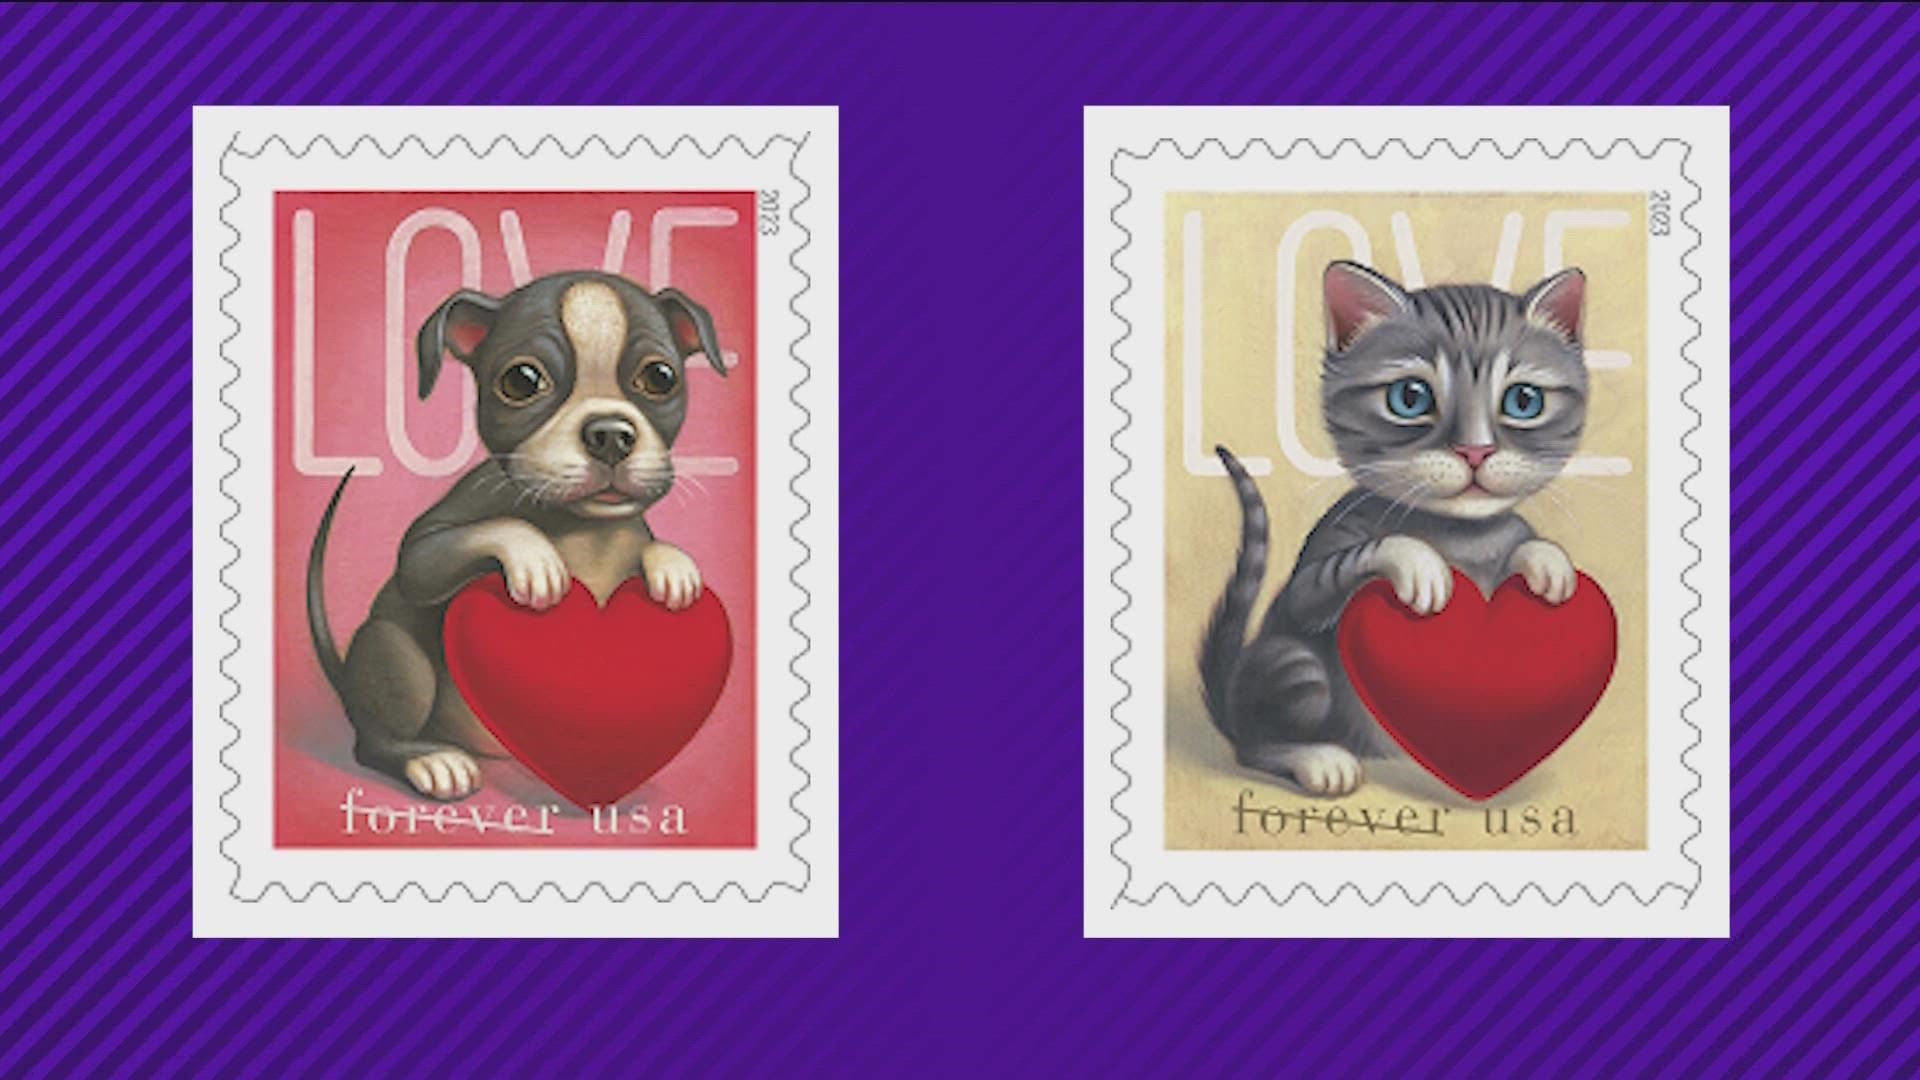 The new 2023 "Love Forever" stamps were revealed in Austin on Thursday.